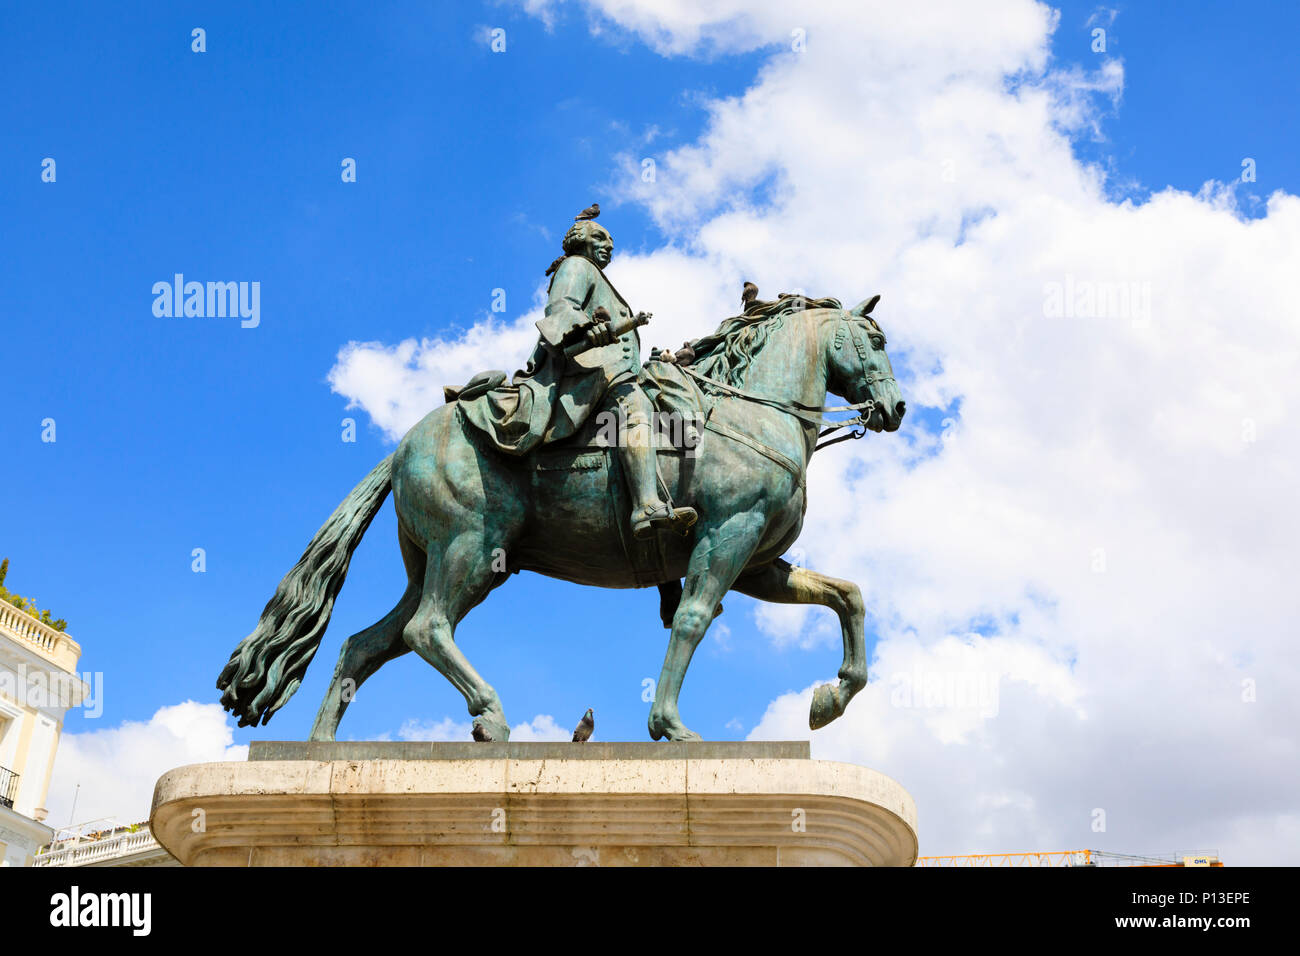 Bronze statue of Charles III on a horse, Plaza de Puerta del Sol, Madrid, Spain. May 2018 Stock Photo